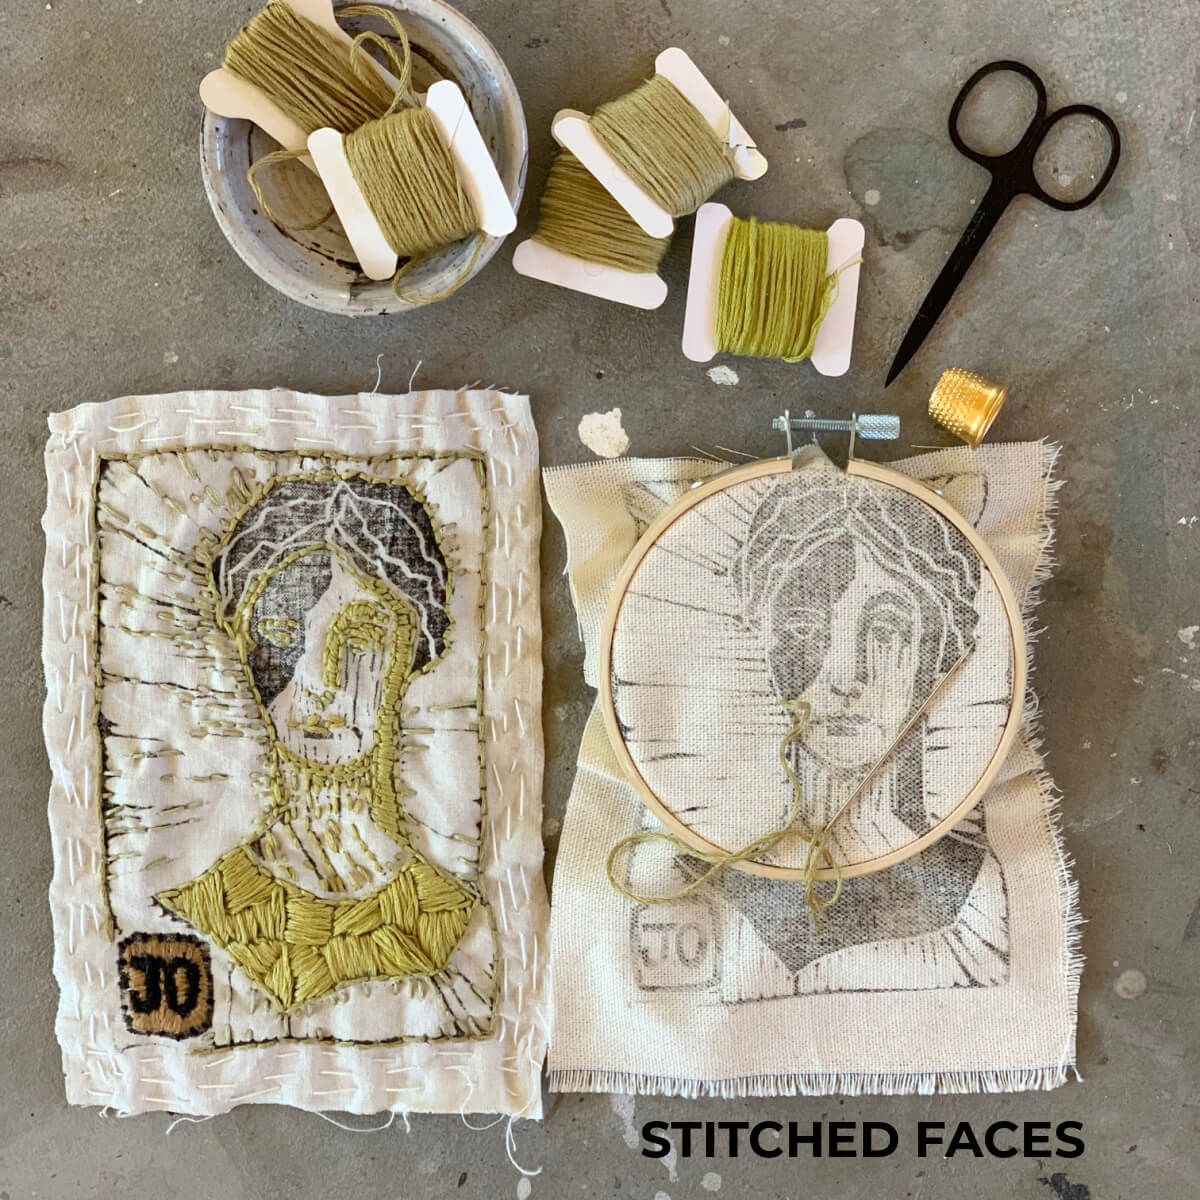 Stitched Faces | Instant Access!